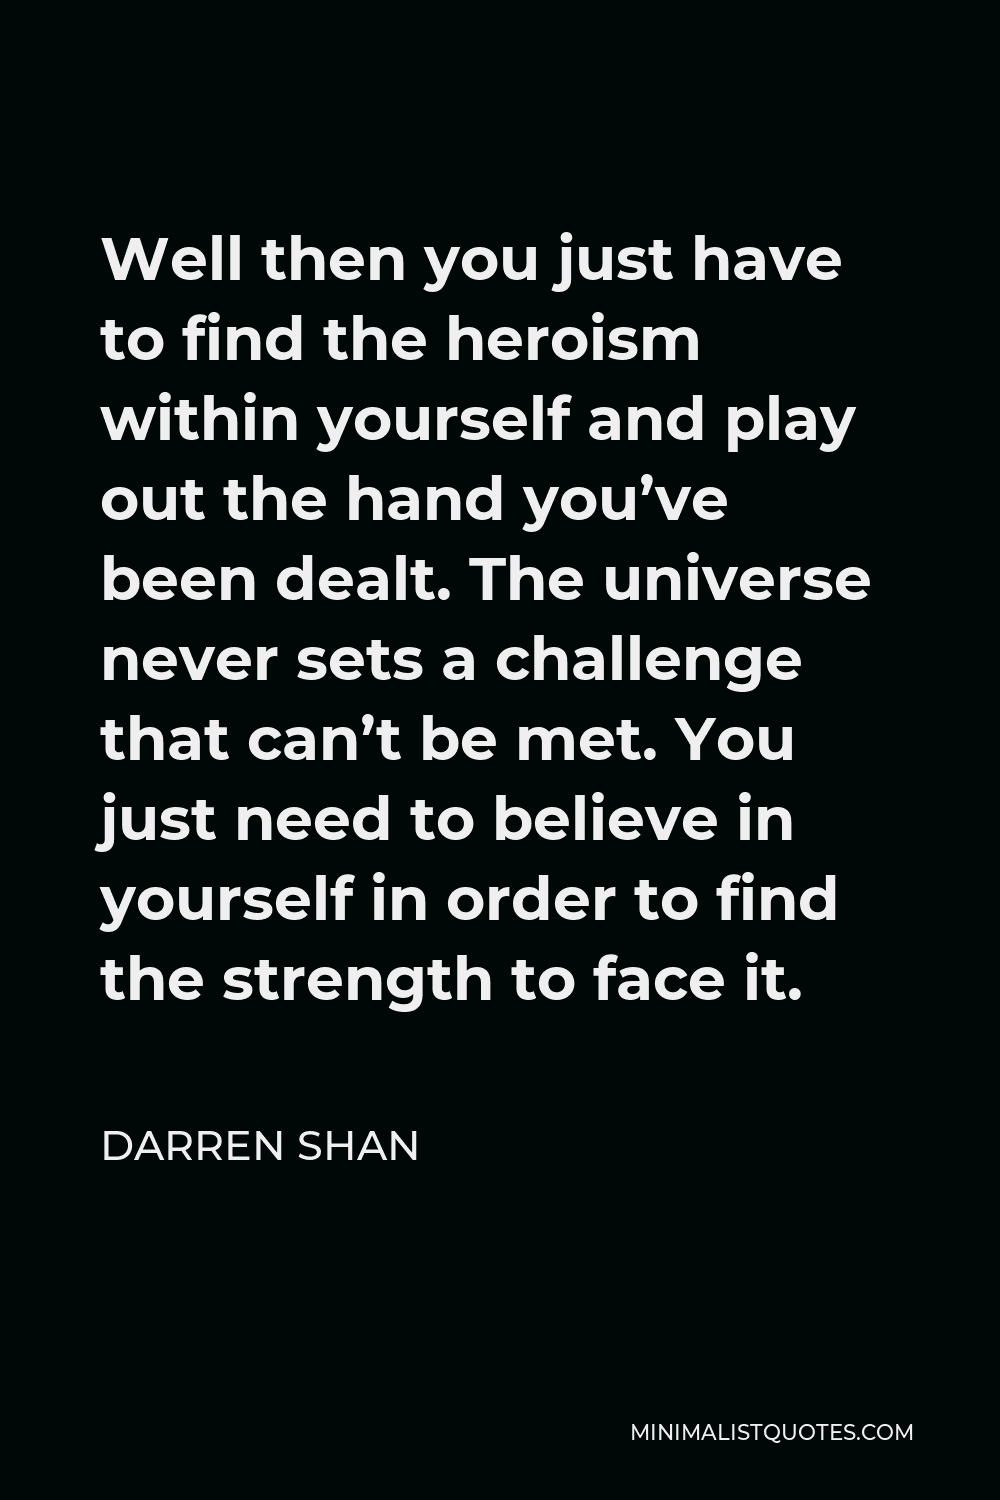 Darren Shan Quote - Well then you just have to find the heroism within yourself and play out the hand you’ve been dealt. The universe never sets a challenge that can’t be met. You just need to believe in yourself in order to find the strength to face it.